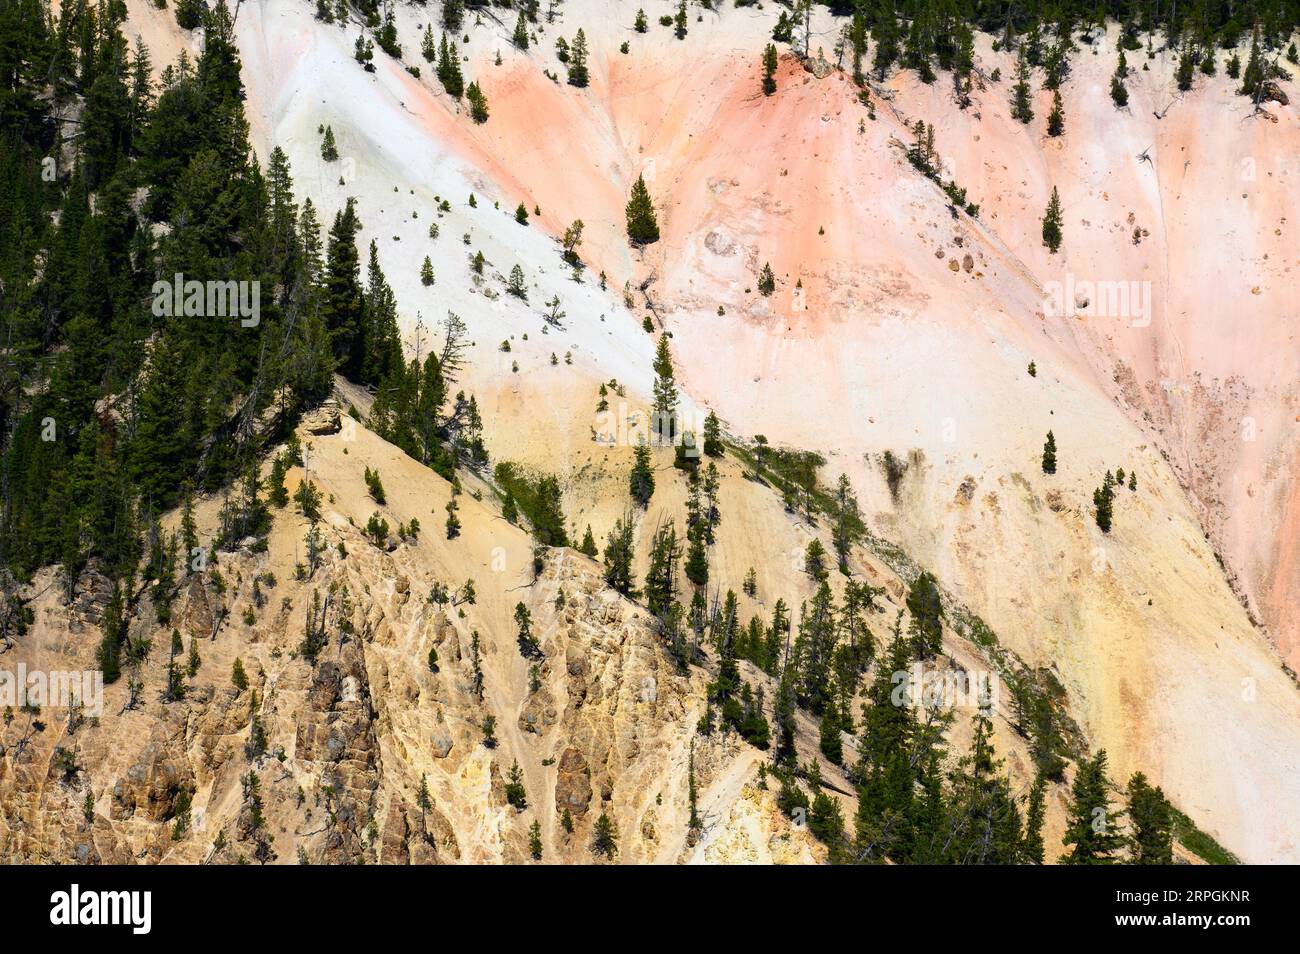 The vibrant colours of the walls of the Grand Canyon of Yellowstone in Yellowstone National Park Stock Photo